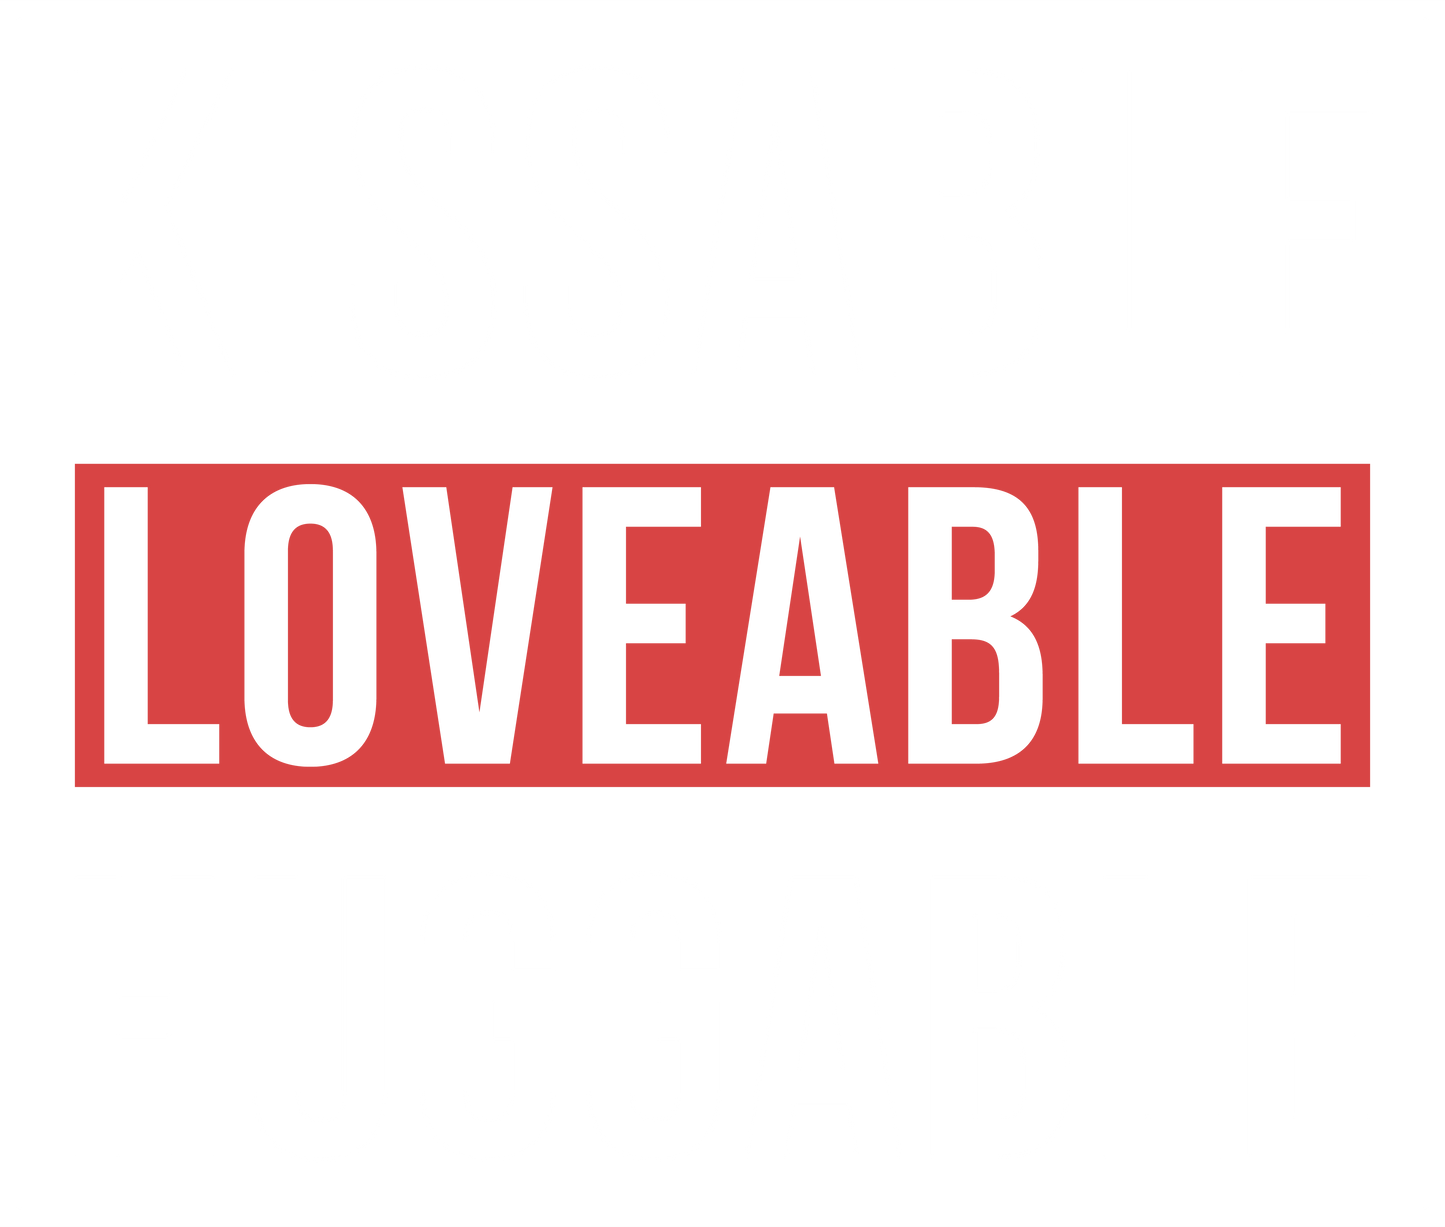 VALENTINE'S DAY PRINT 196 - LOVEABLE 1